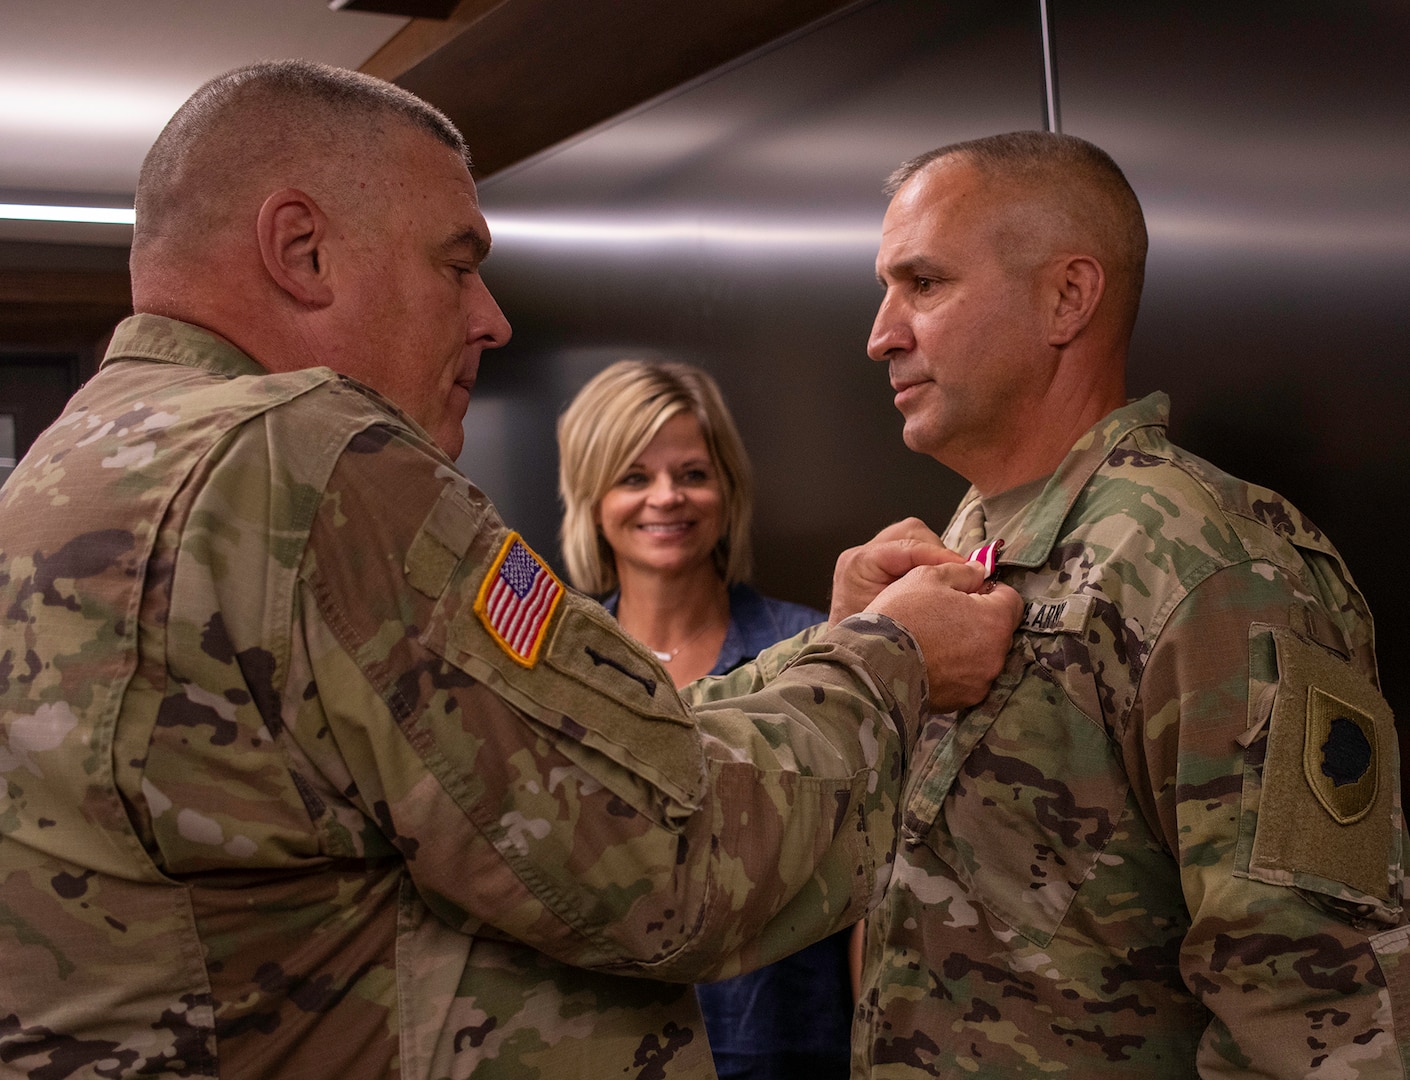 Lt. Col. Roger “Mike” Landon, right, of Petersburg, Illinois, receives a Meritorious Service Medal, from Col. Brian Creech, of Petersburg, Illinois, U.S. Property and Fiscal Officer for Illinois, during his retirement ceremony Sept. 30 at Joint Force Headquarters, Camp Lincoln, Springfield, Illinois.